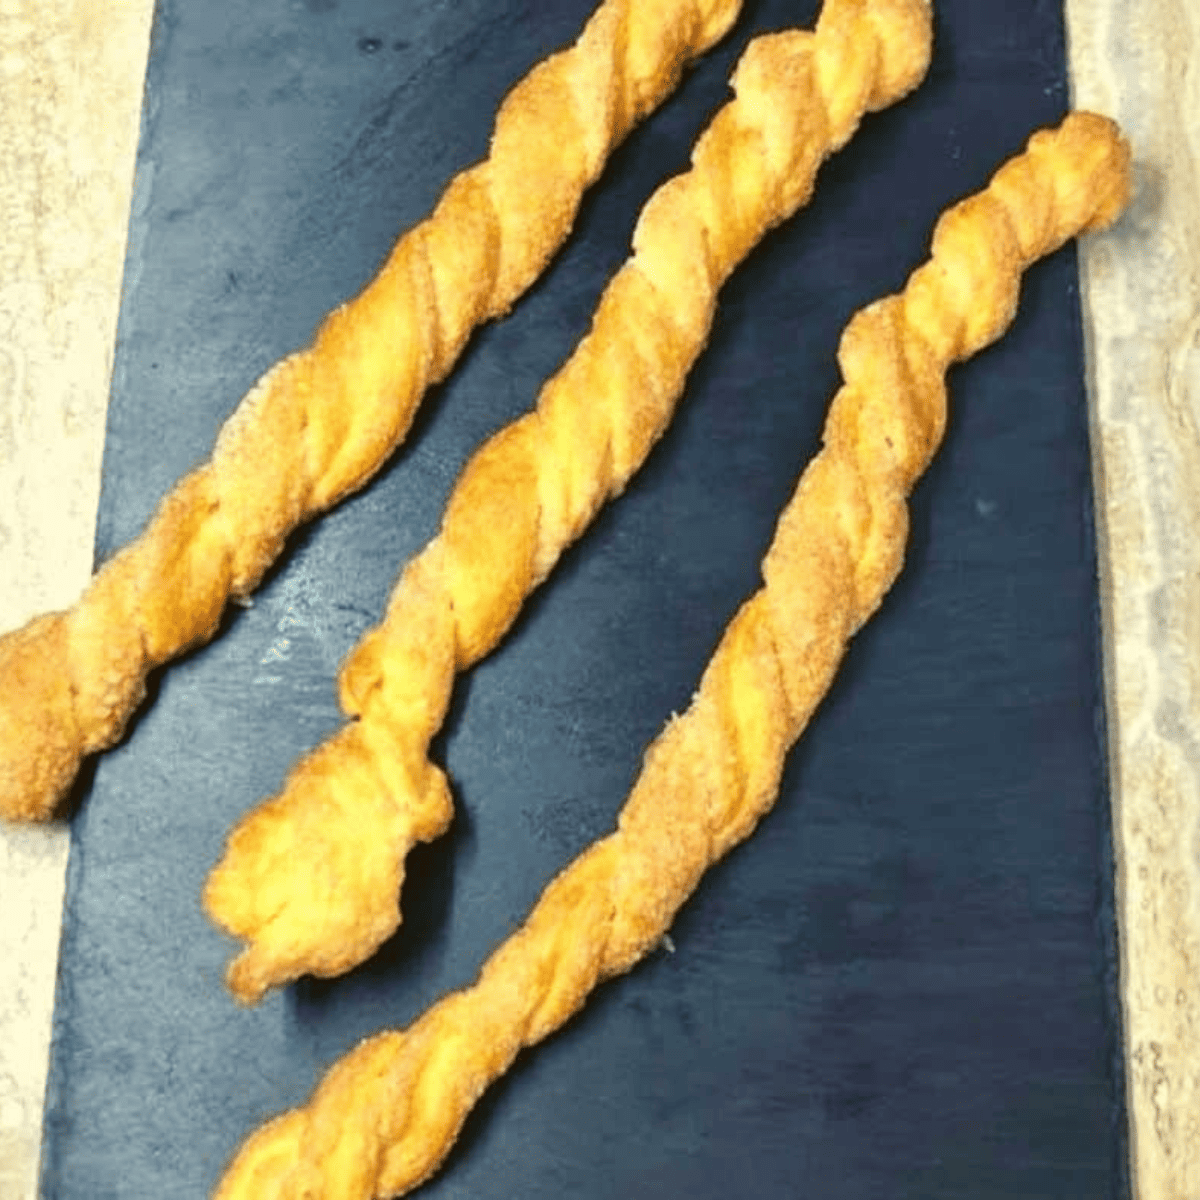 Twist the Strips: Take the long strips and twist it multiple times to create a spiral shape. Place the twisted strips on a baking sheet or plate.

Grease the Air Fryer Basket: Lightly grease the air fryer basket with cooking spray to prevent sticking.

Air Fry the Twists: Arrange the twisted pastry strips in a single layer in the air fryer basket, leaving some space between them. Depending on the size of your air fryer, you may need to cook them in batches.

Air Fry for 6-8 Minutes: Air fry the cinnamon twists at 375°F (190°C) with a cooking time of  6-8 minutes or until golden brown and crispy.

Cool and Serve: Remove the twists from the air fryer and let them cool slightly. Optionally, dust with powdered sugar for an extra touch of sweetness.

Enjoy: Serve your cinnamon roll twist while still warm and crispy. Serve with sweet cream cheese or your favorite dipping sauce.